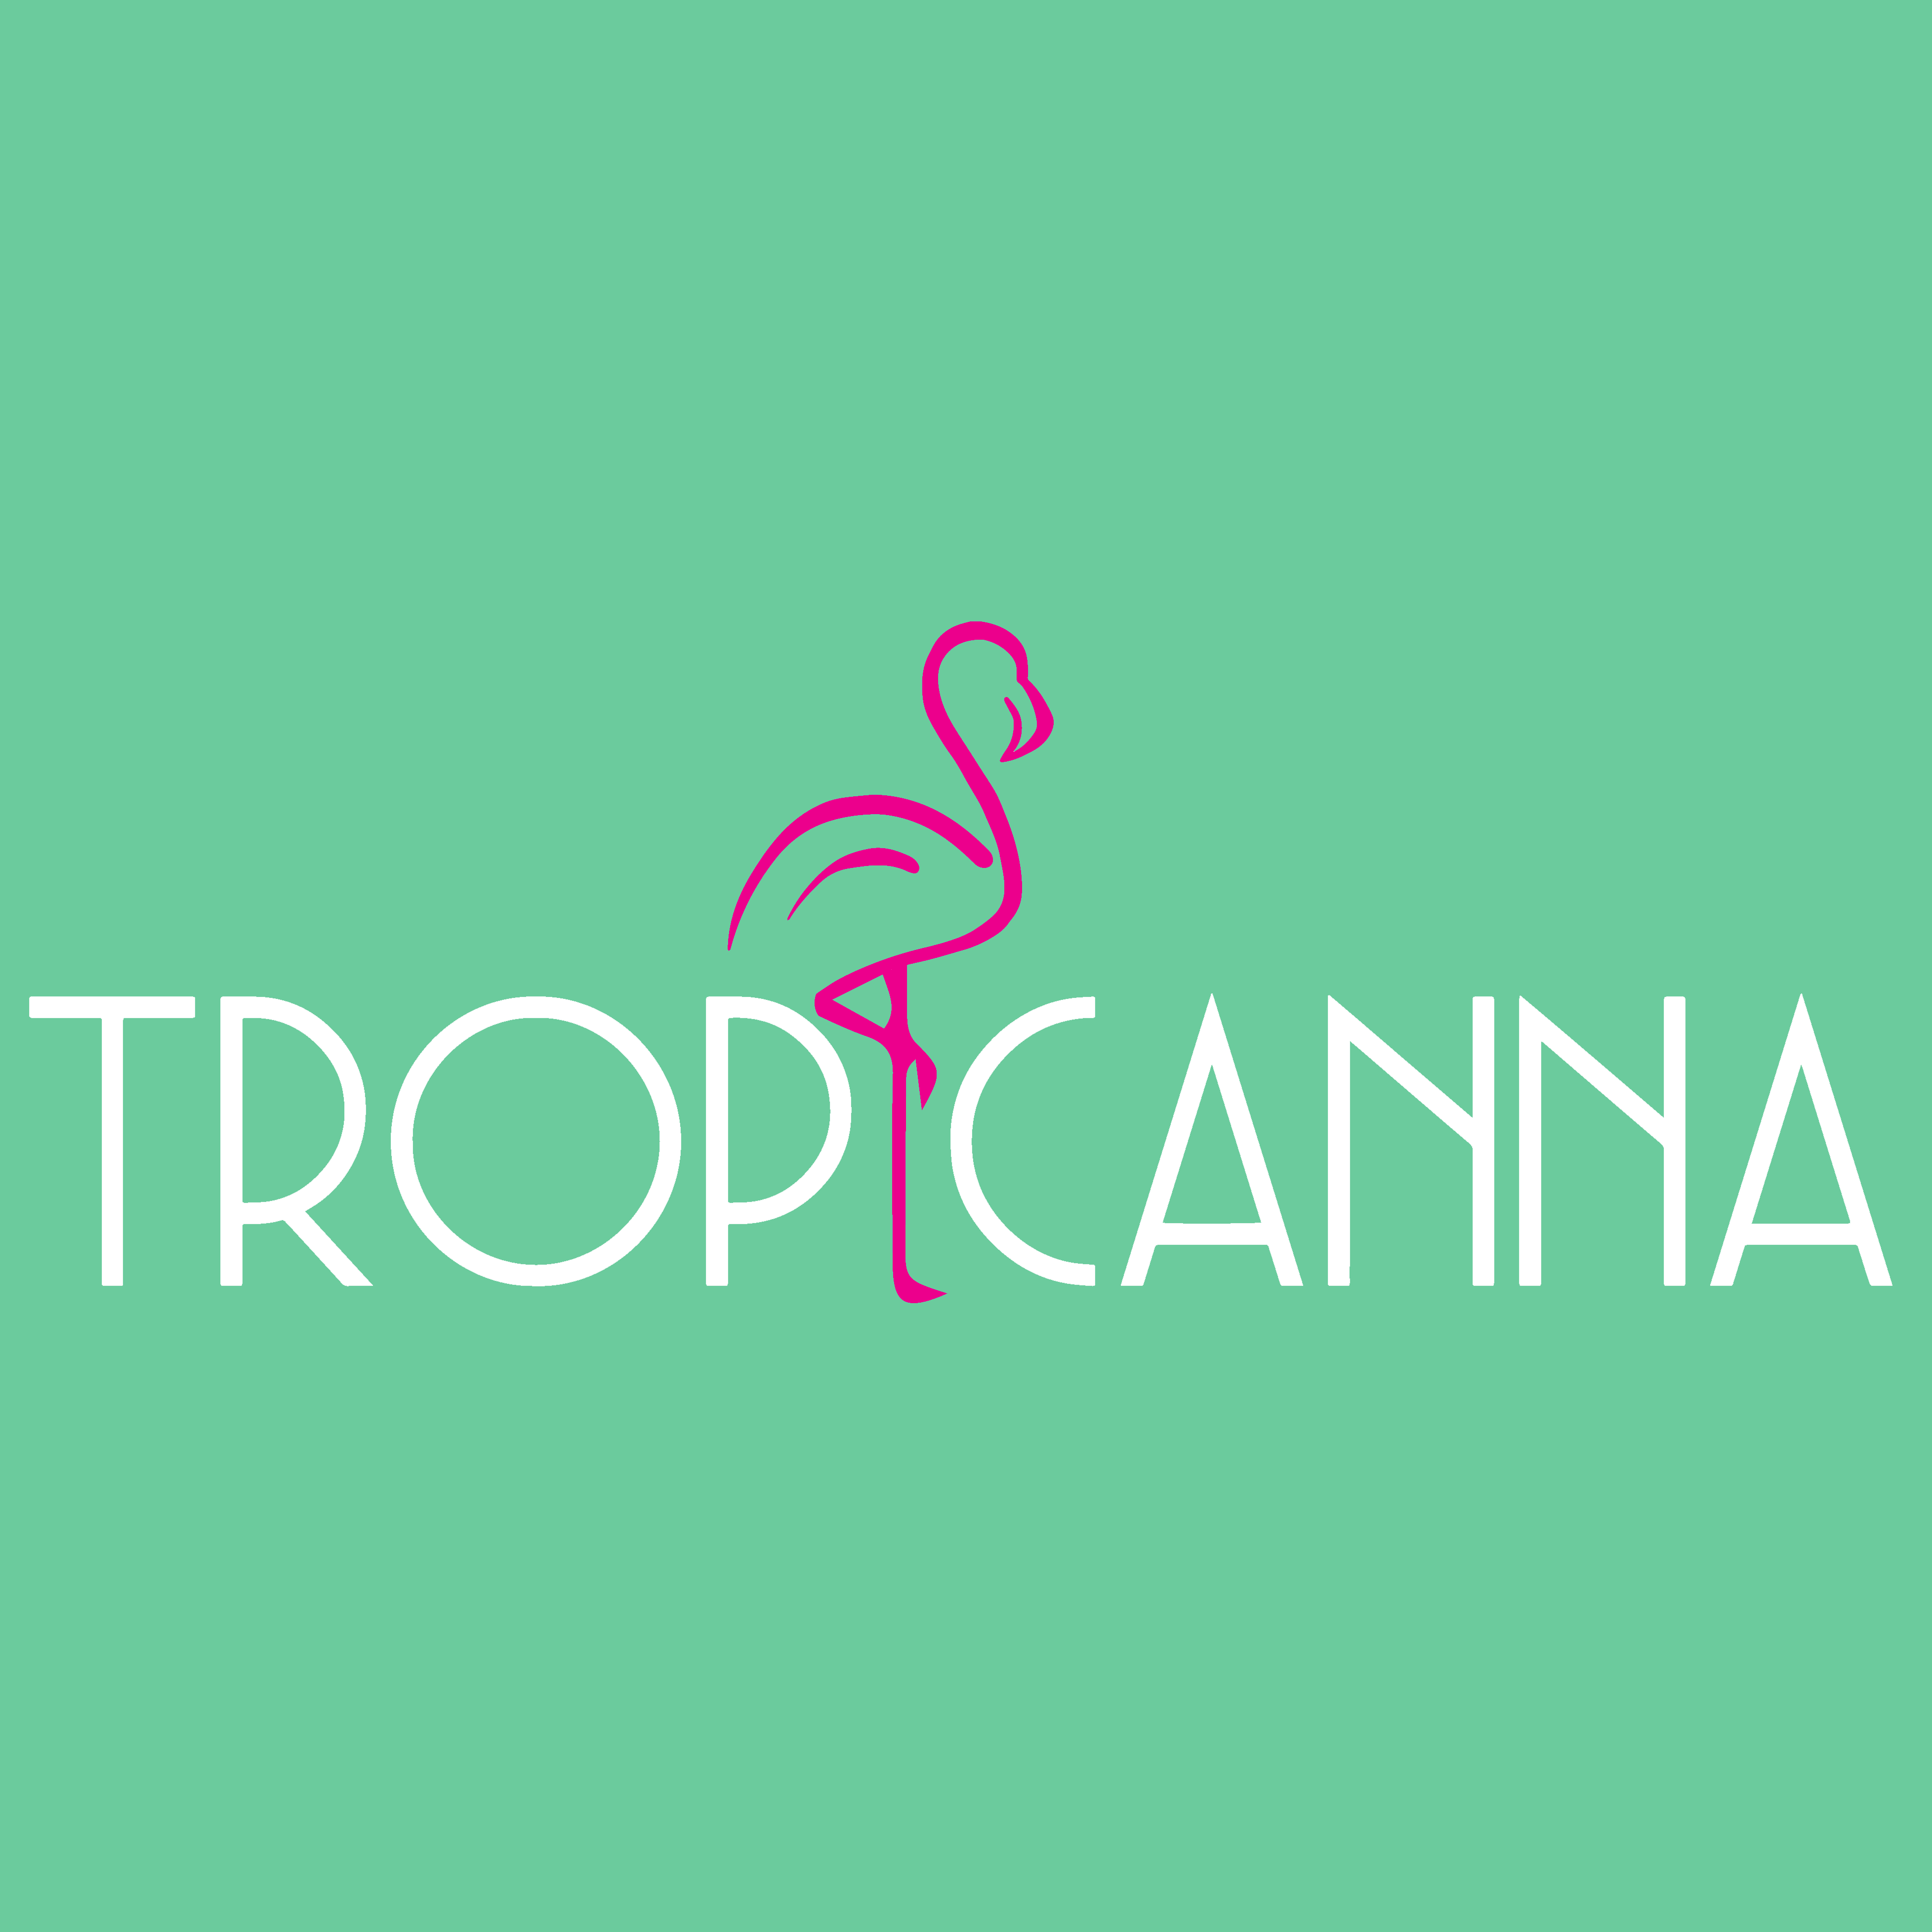 Tropicanna Dispensary and Weed Delivery logo